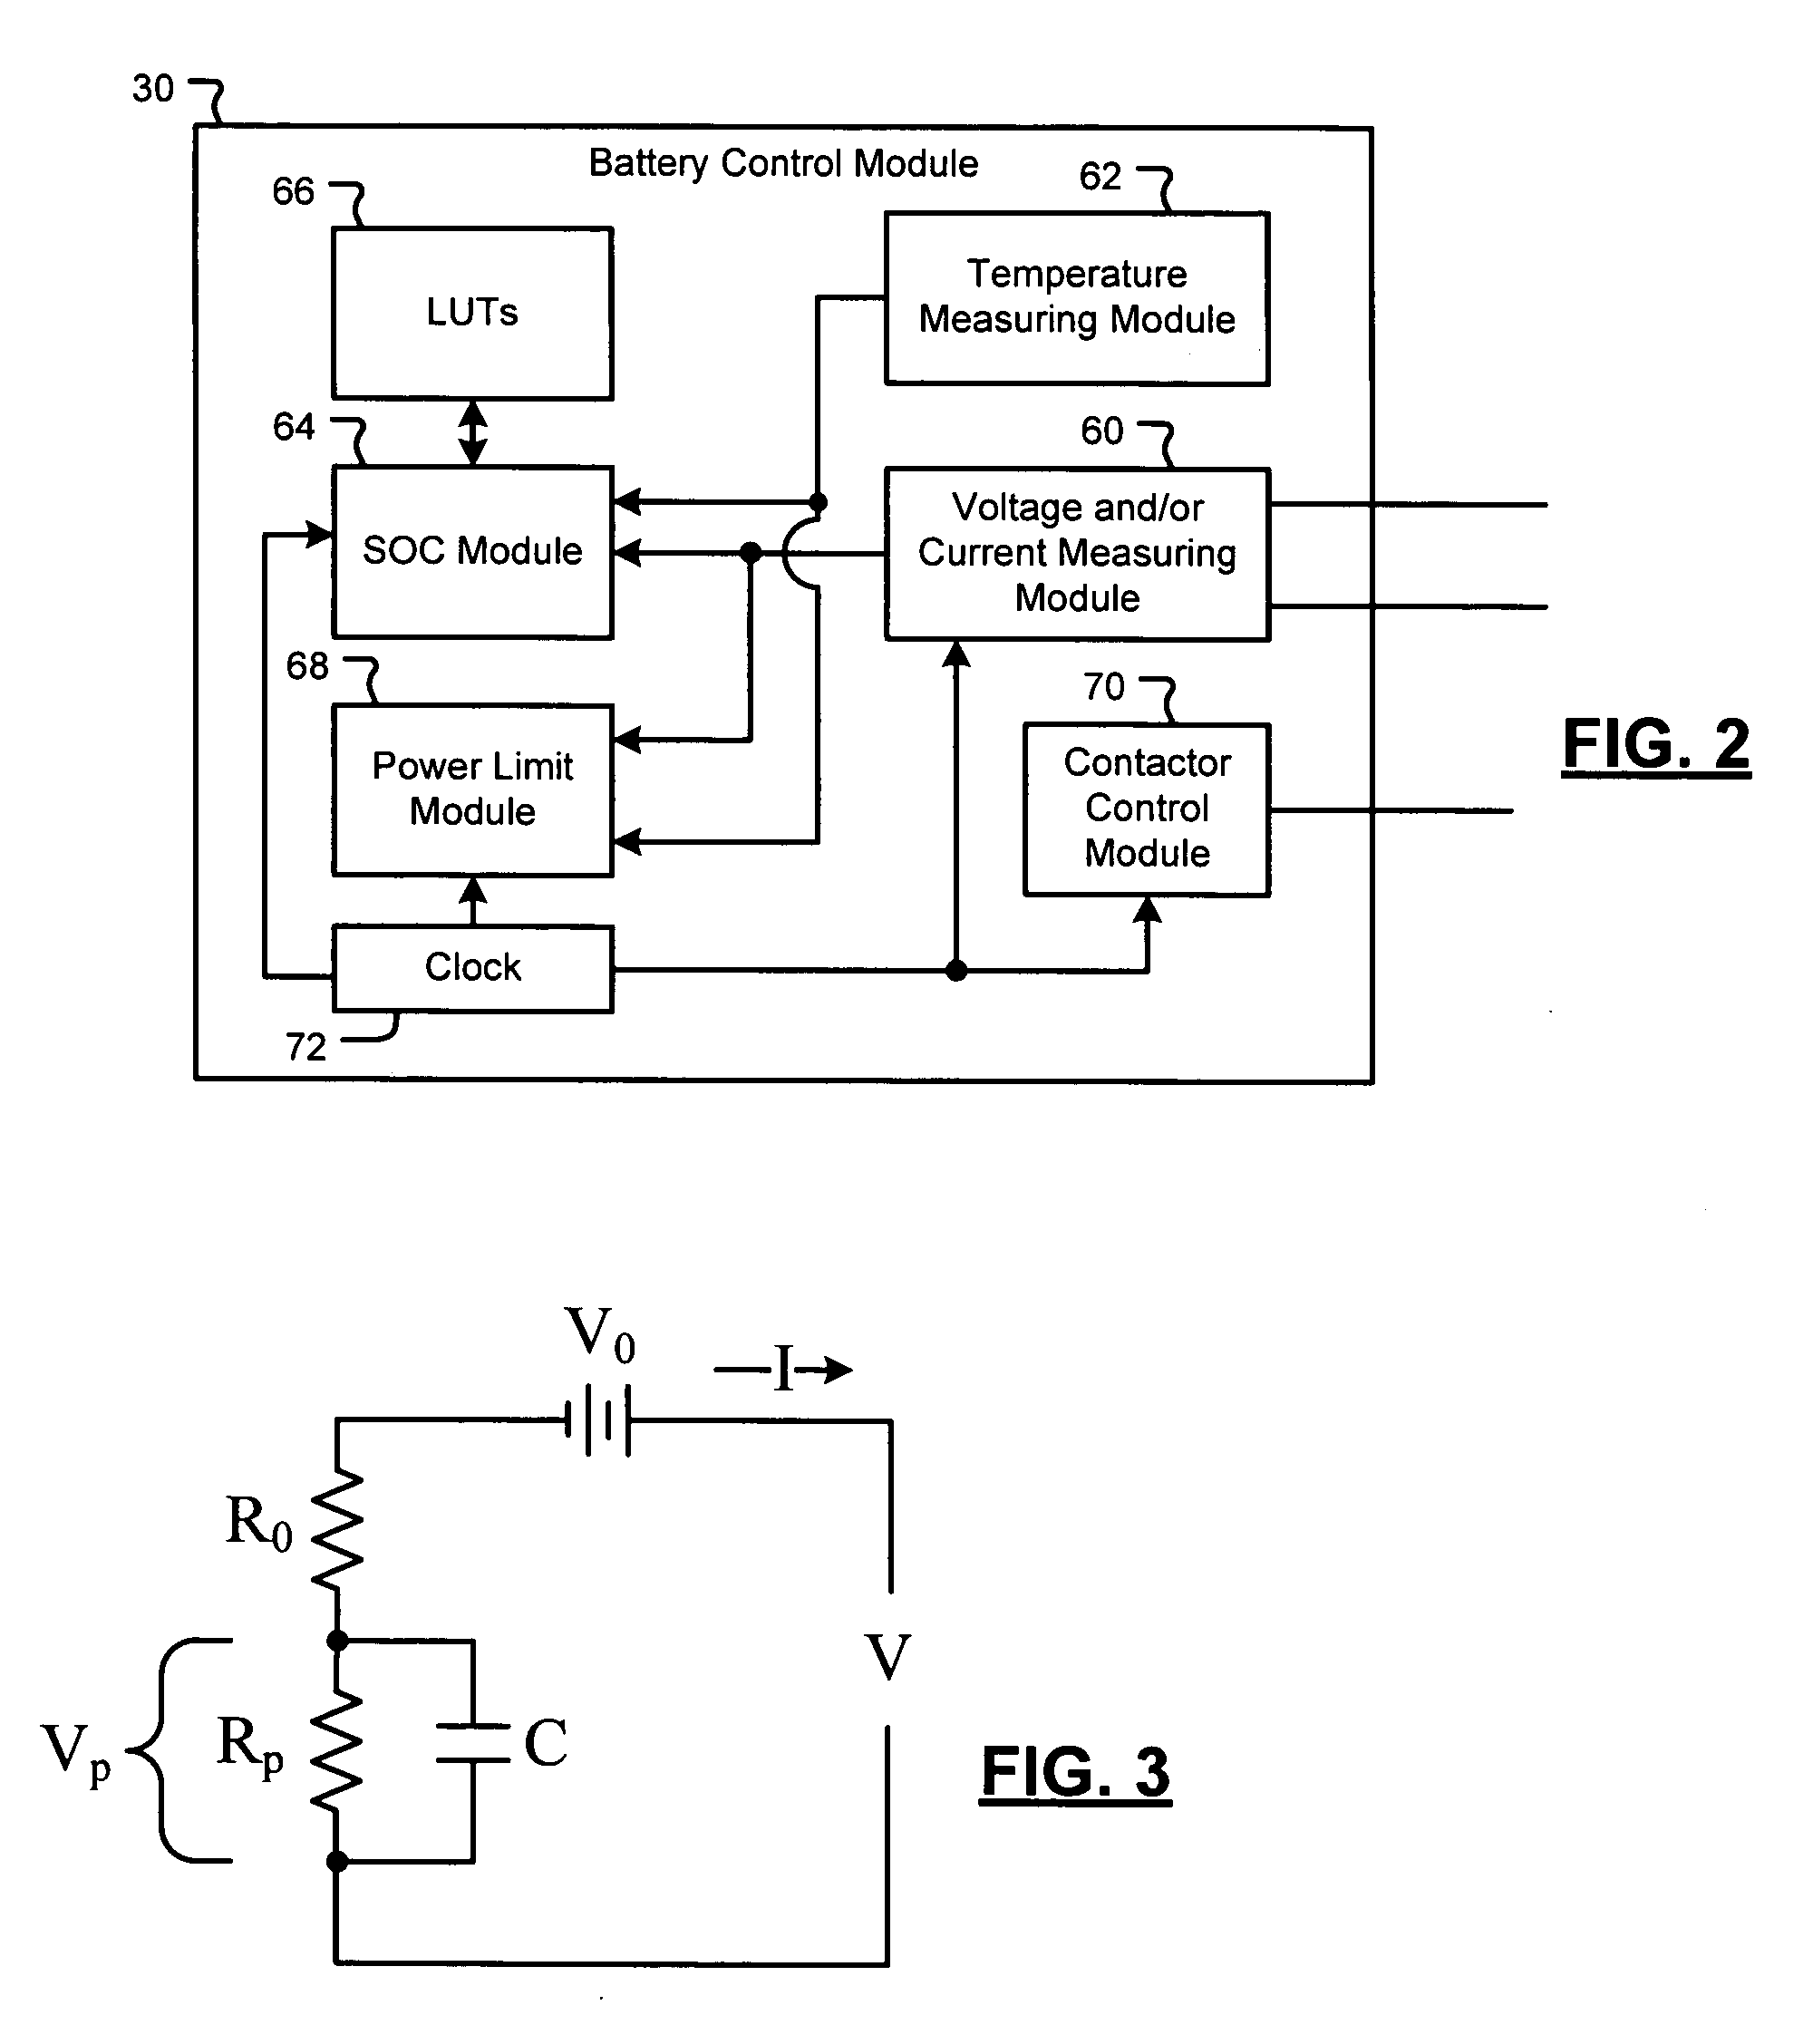 Determination of battery predictive power limits